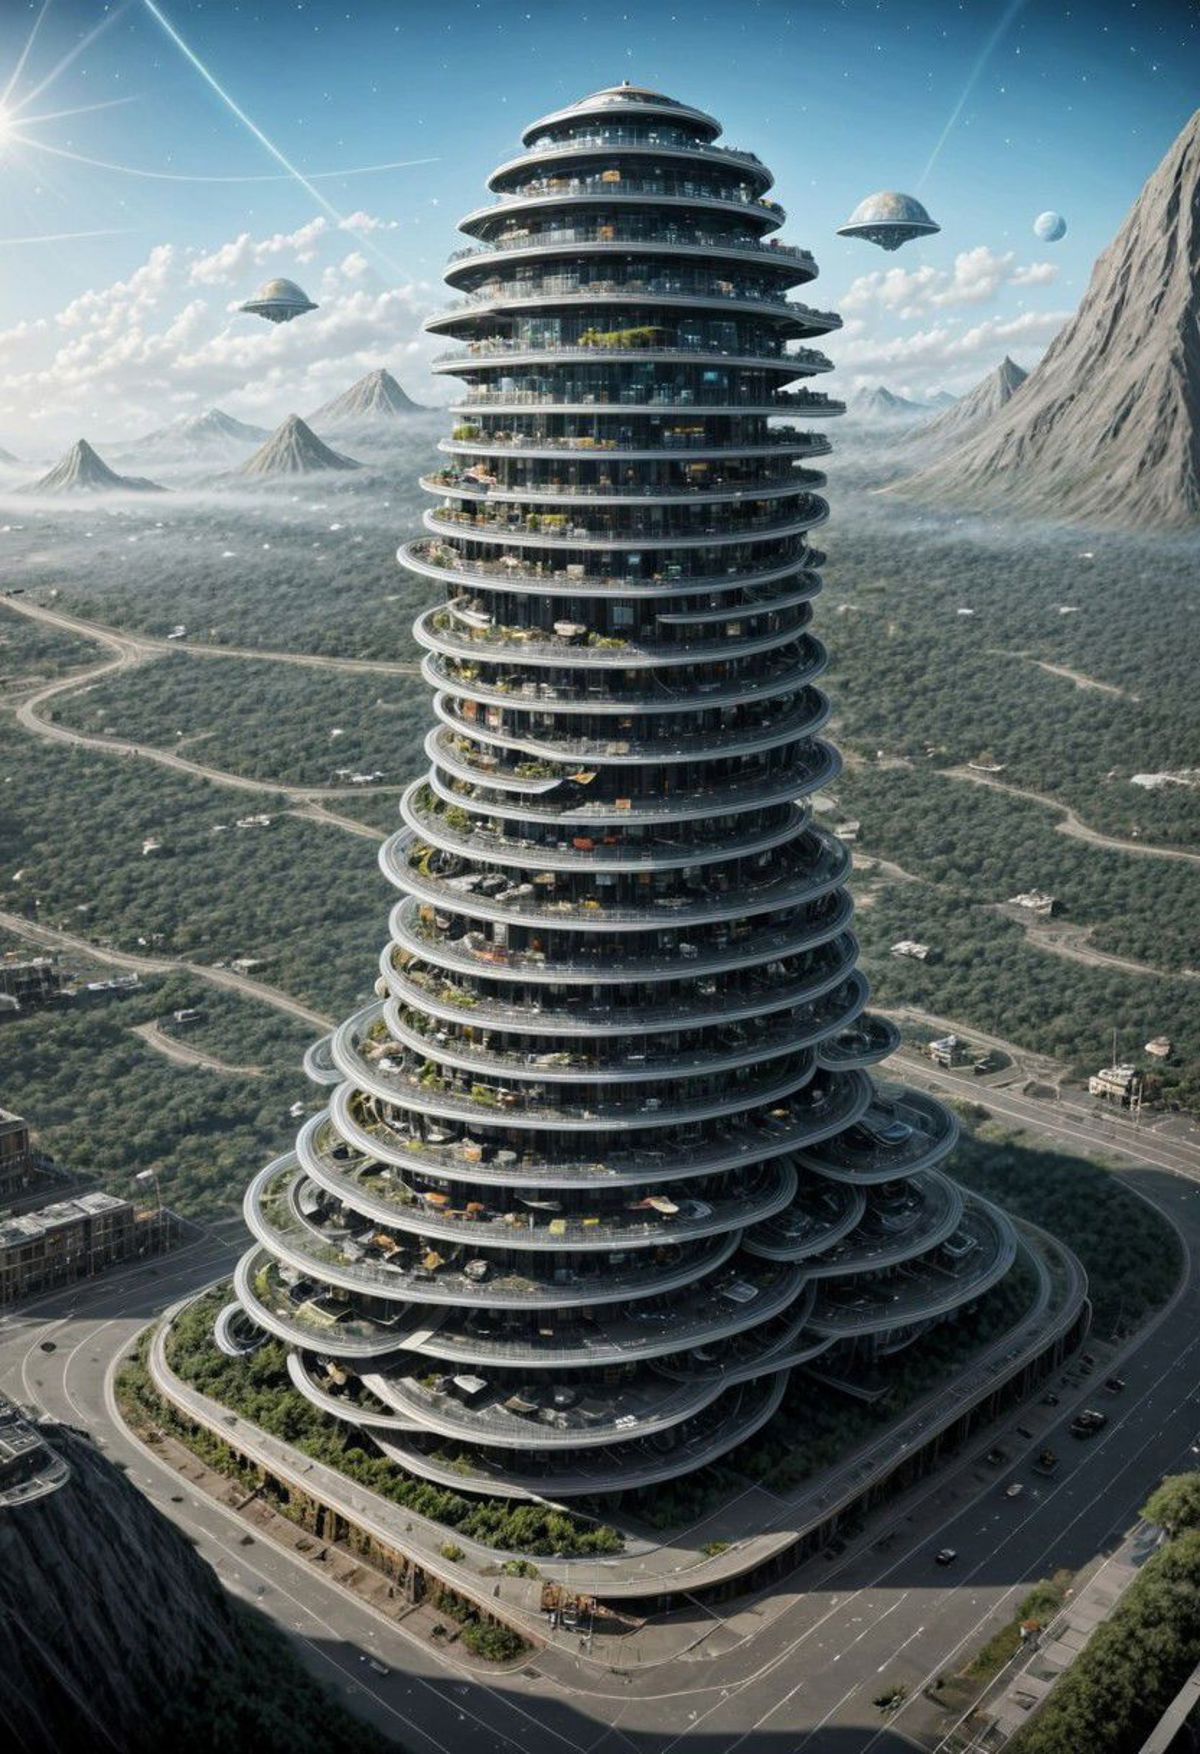 A Futuristic City with a Tall Tower in the Middle